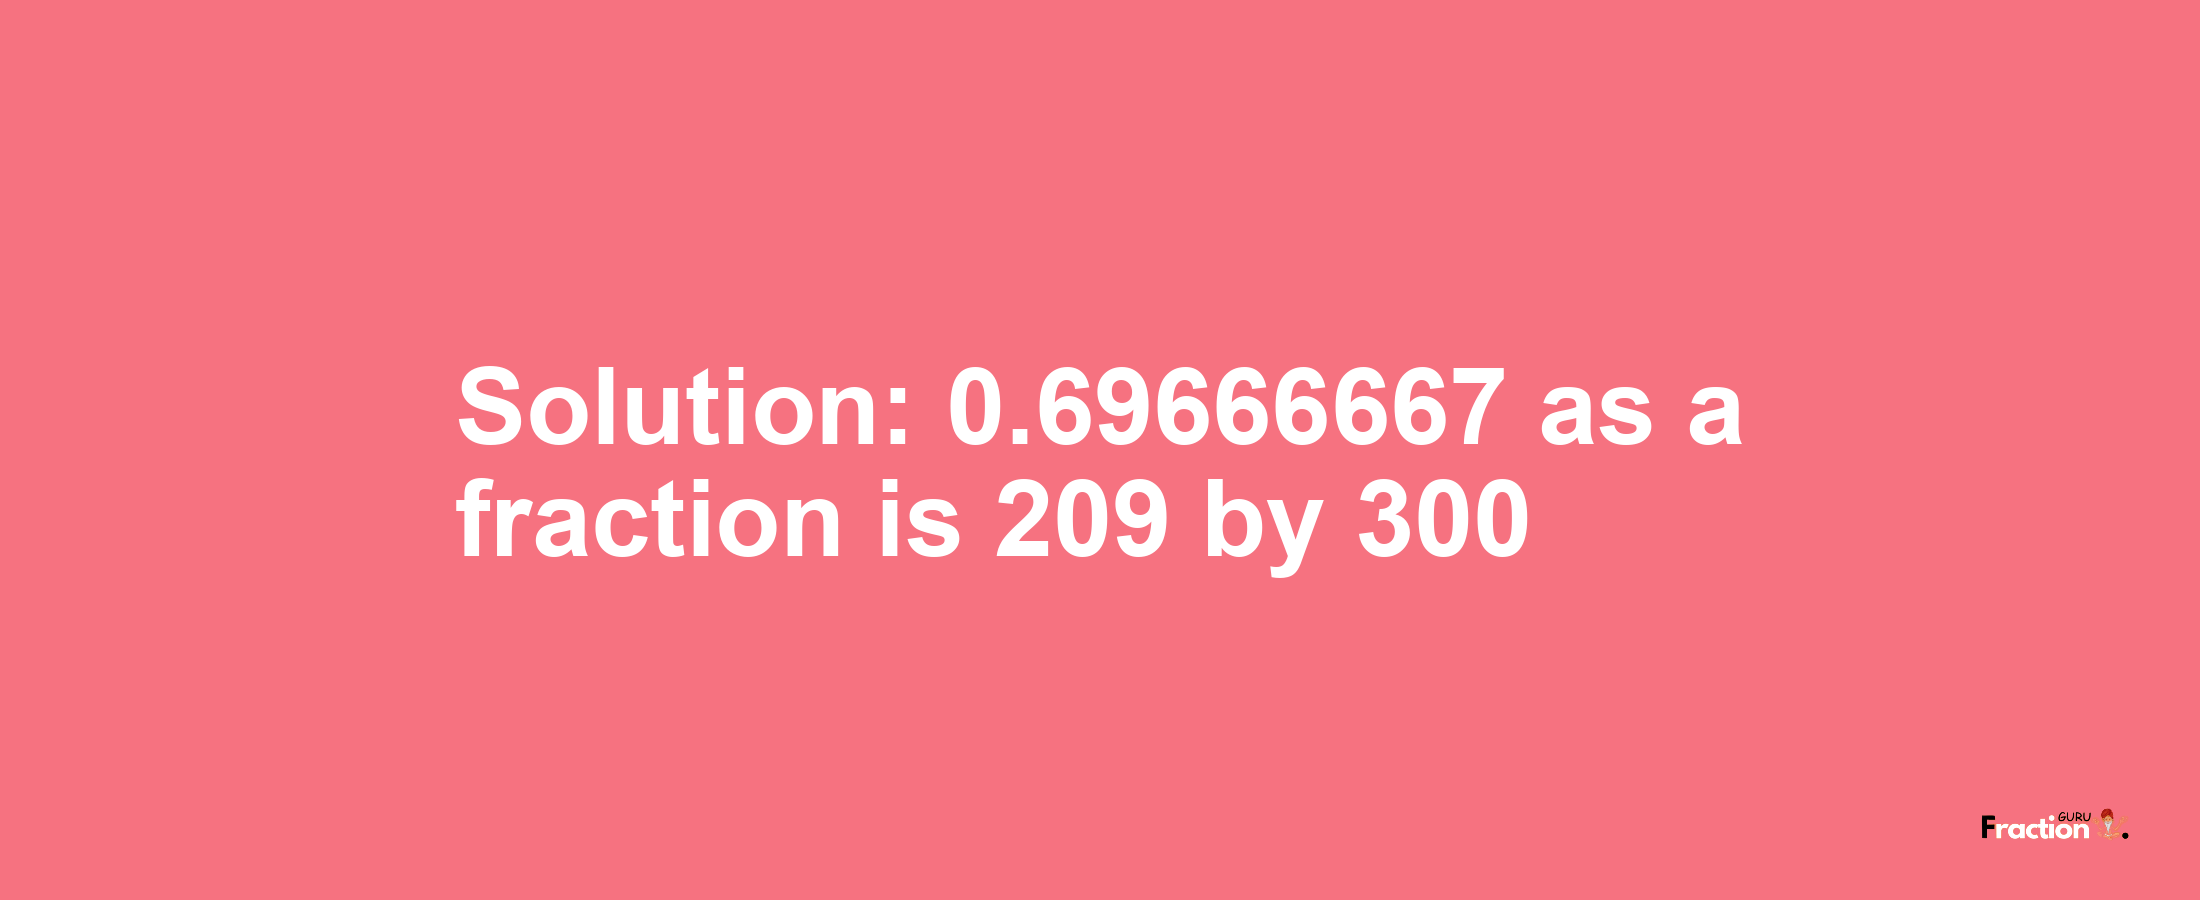 Solution:0.69666667 as a fraction is 209/300